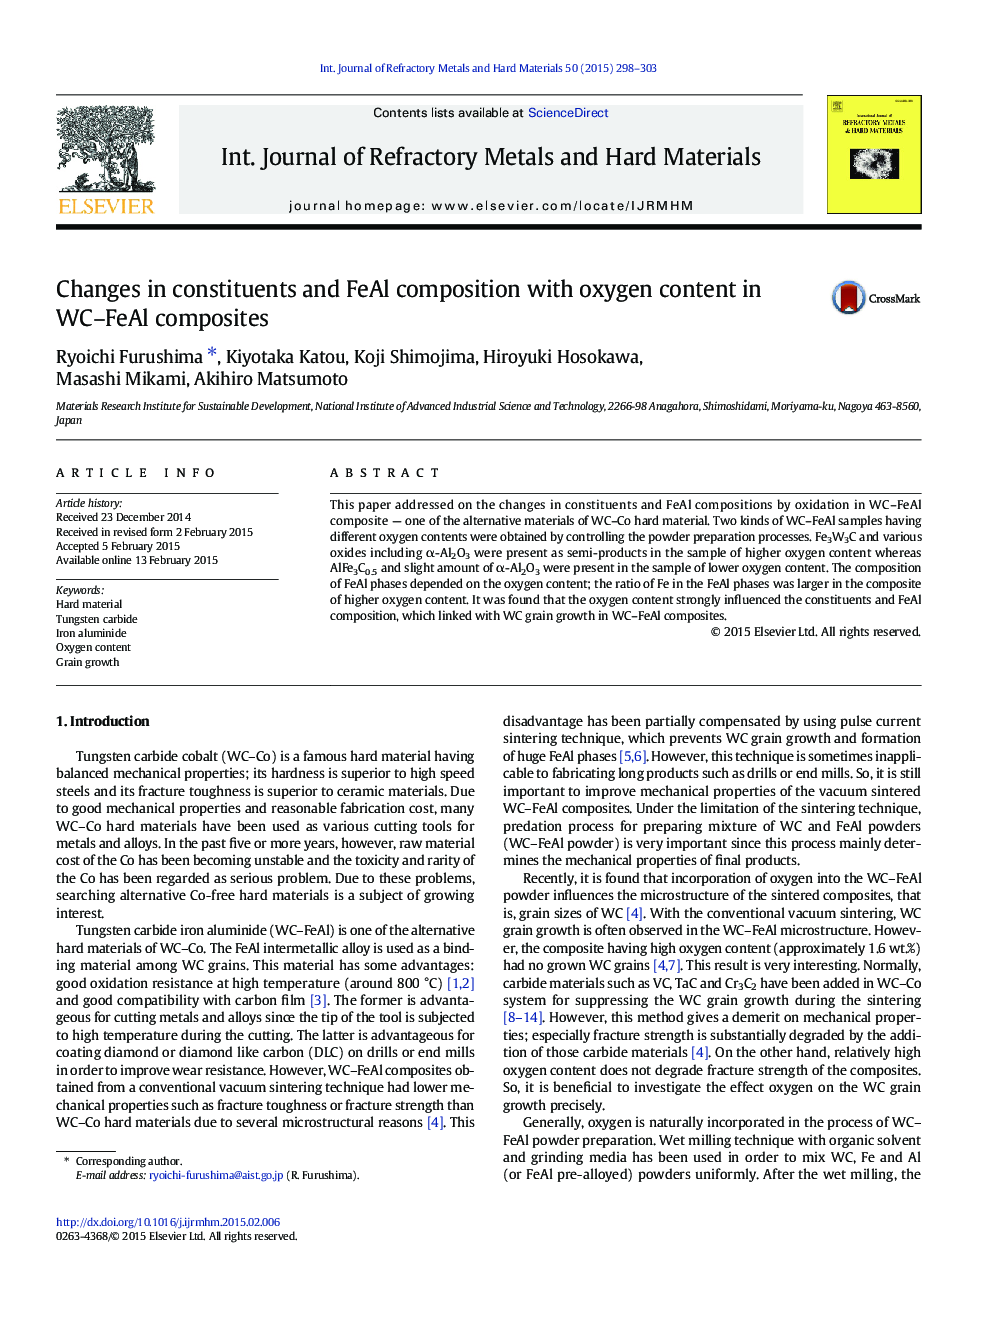 Changes in constituents and FeAl composition with oxygen content in WC–FeAl composites